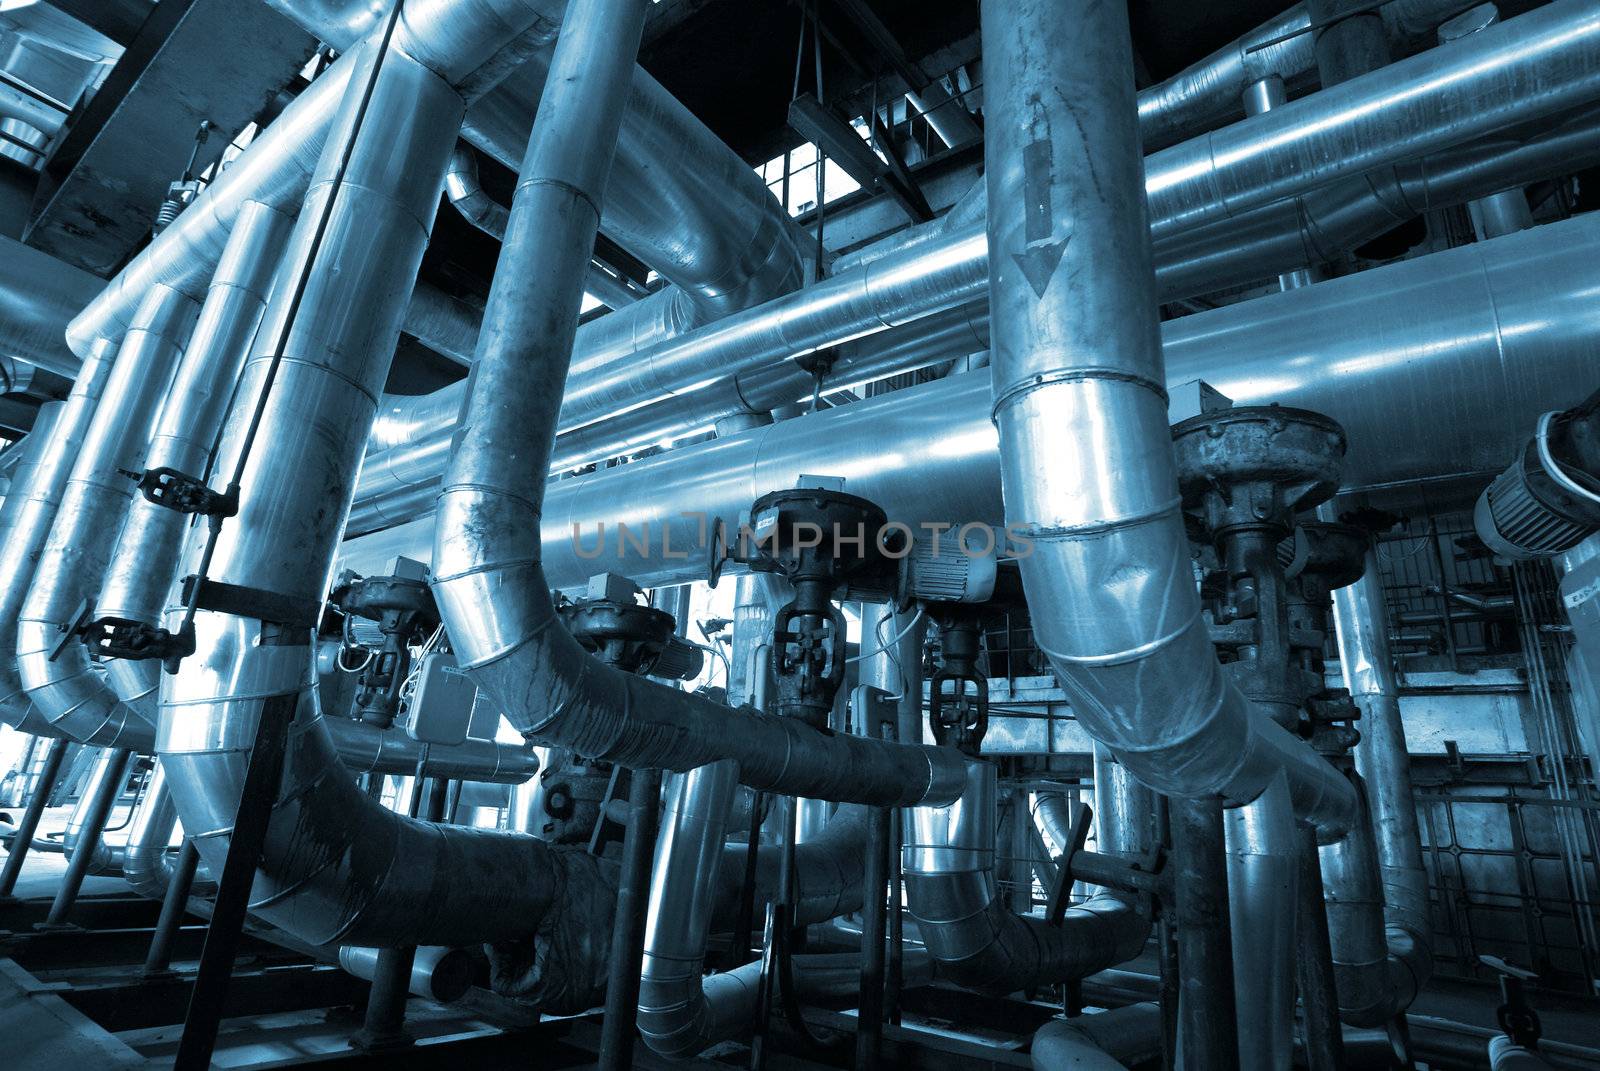 Industrial zone, Steel pipelines and cables in blue tones